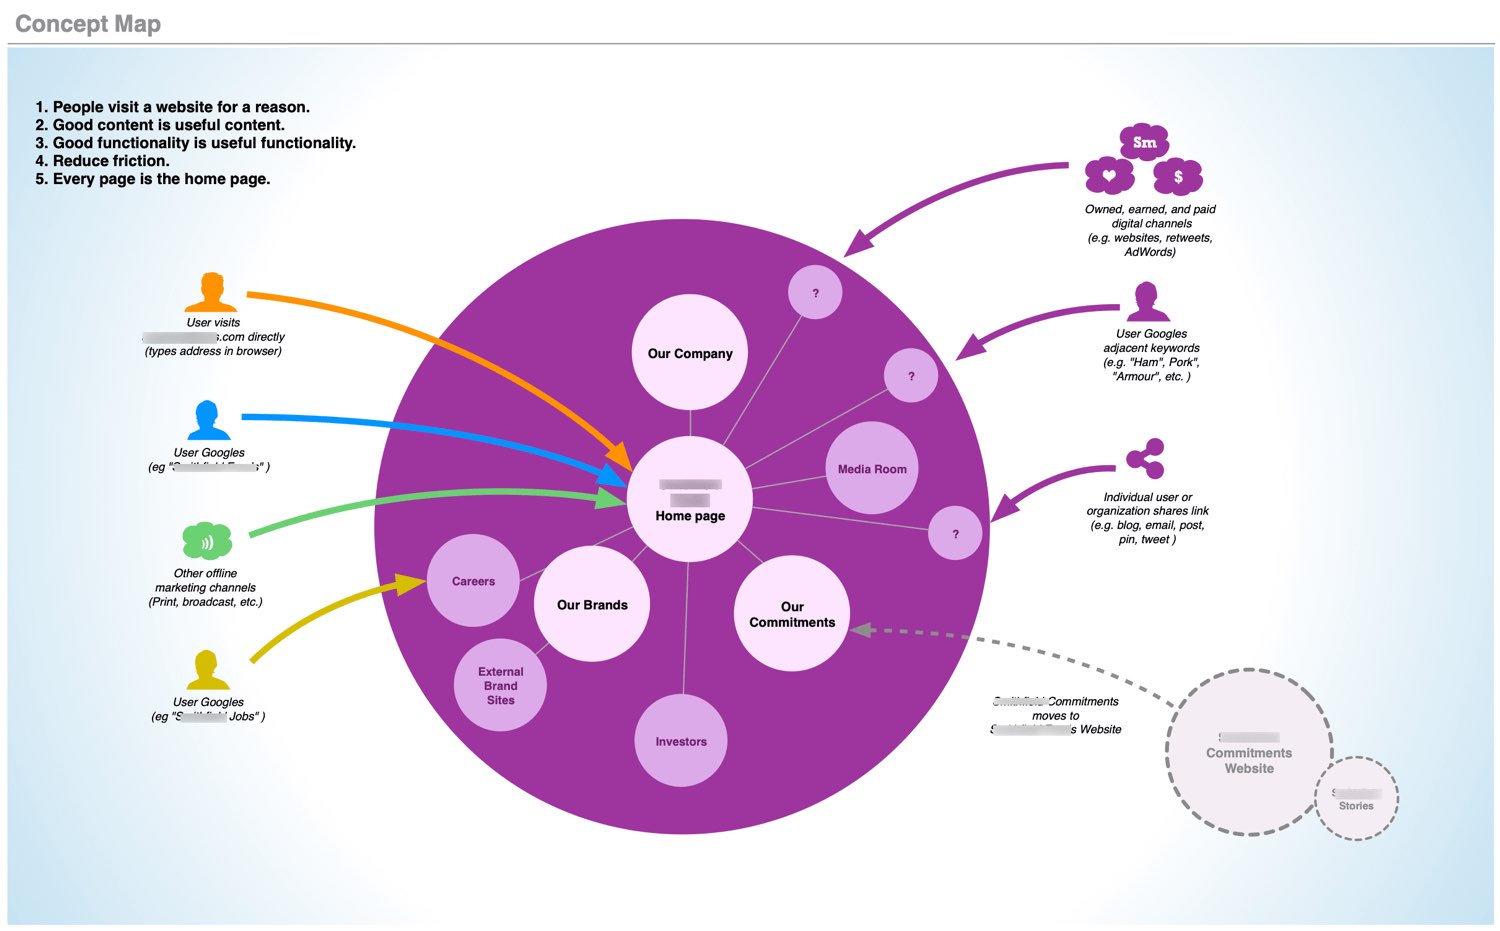 Digital ecosystem diagram for a national consumer packaged goods company